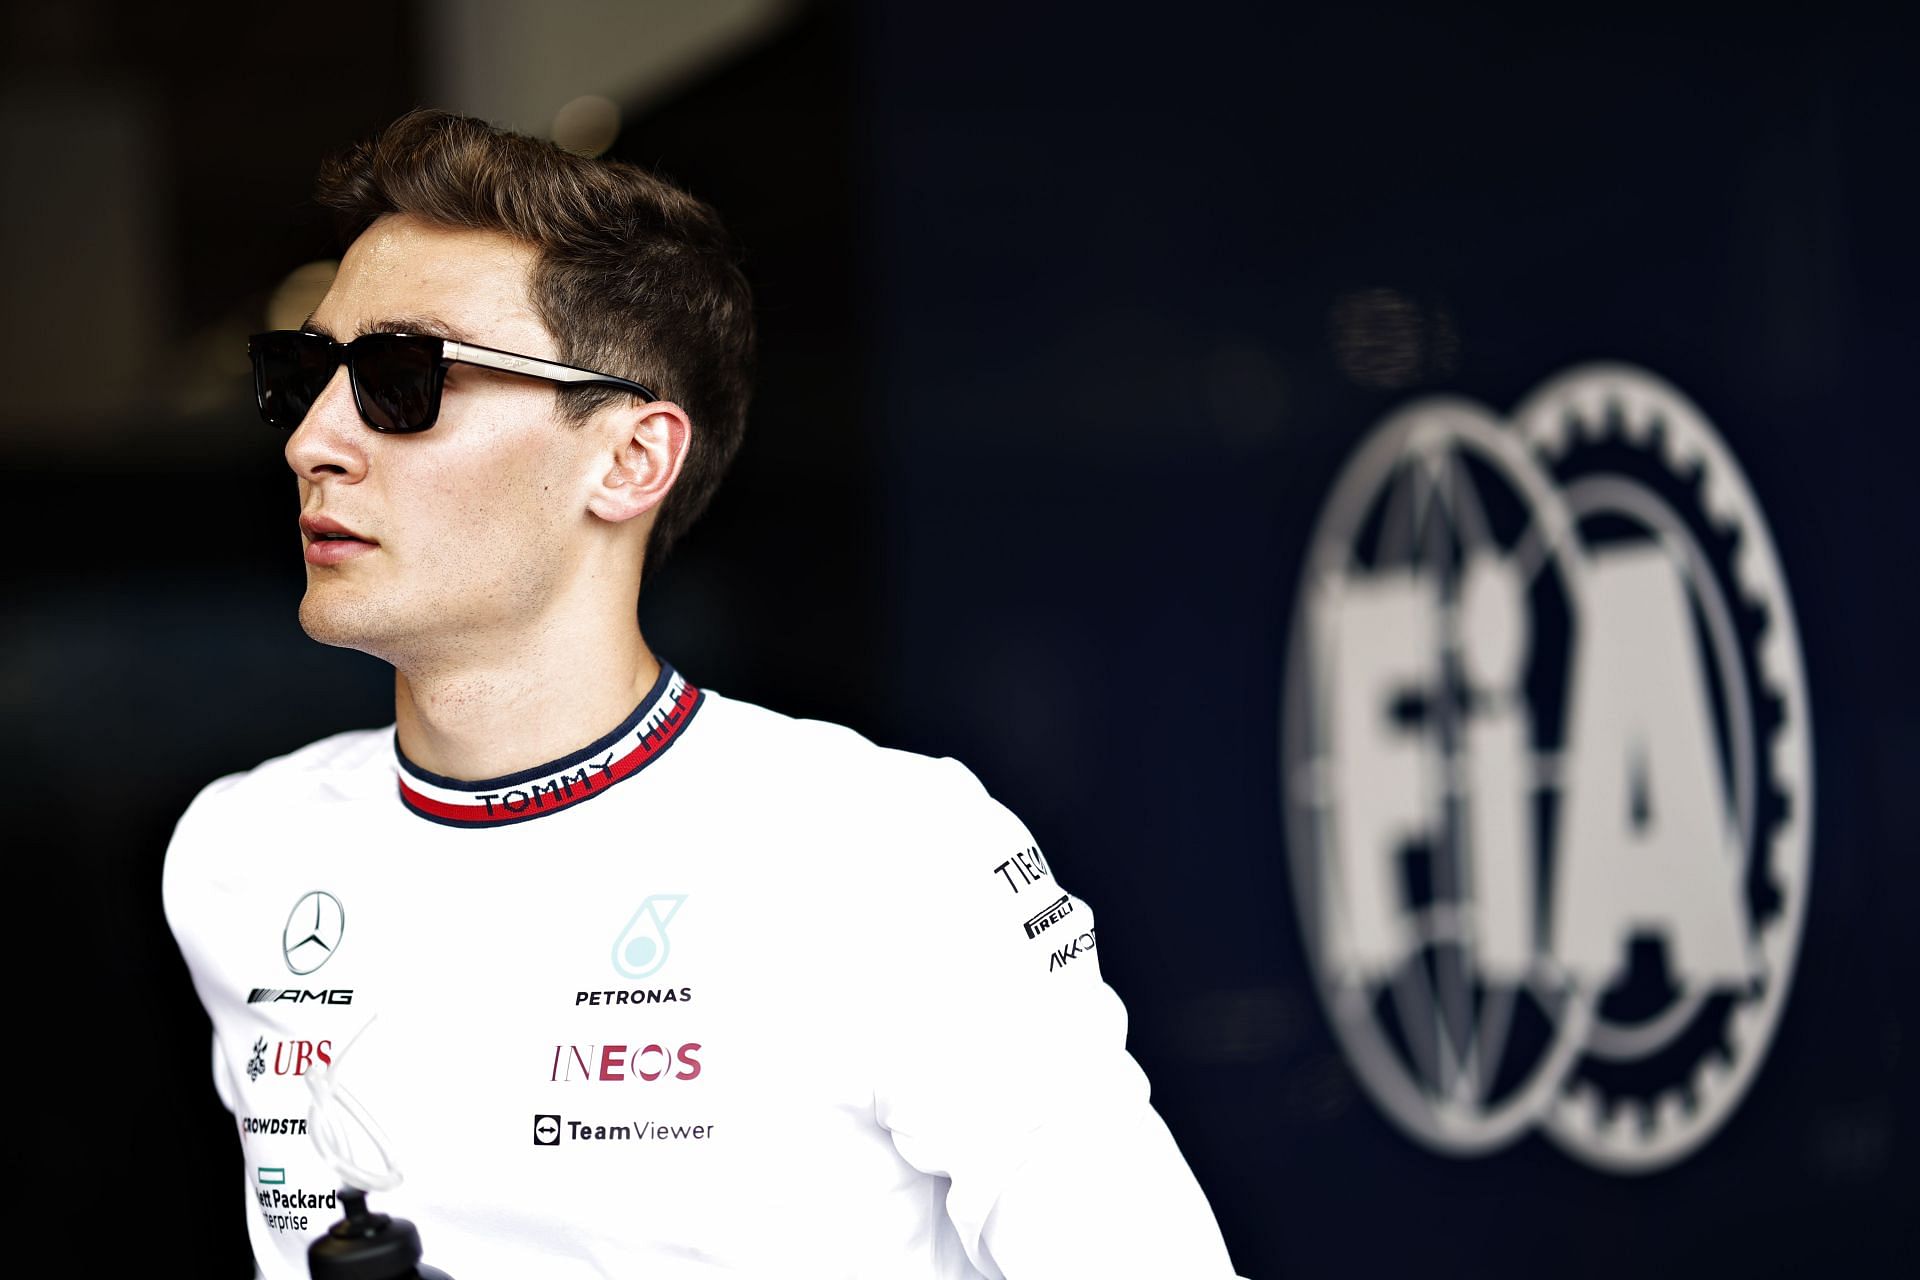 George Russell looks on from the drivers parade prior to the 2022 Miami GP. (Photo by Chris Graythen/Getty Images)